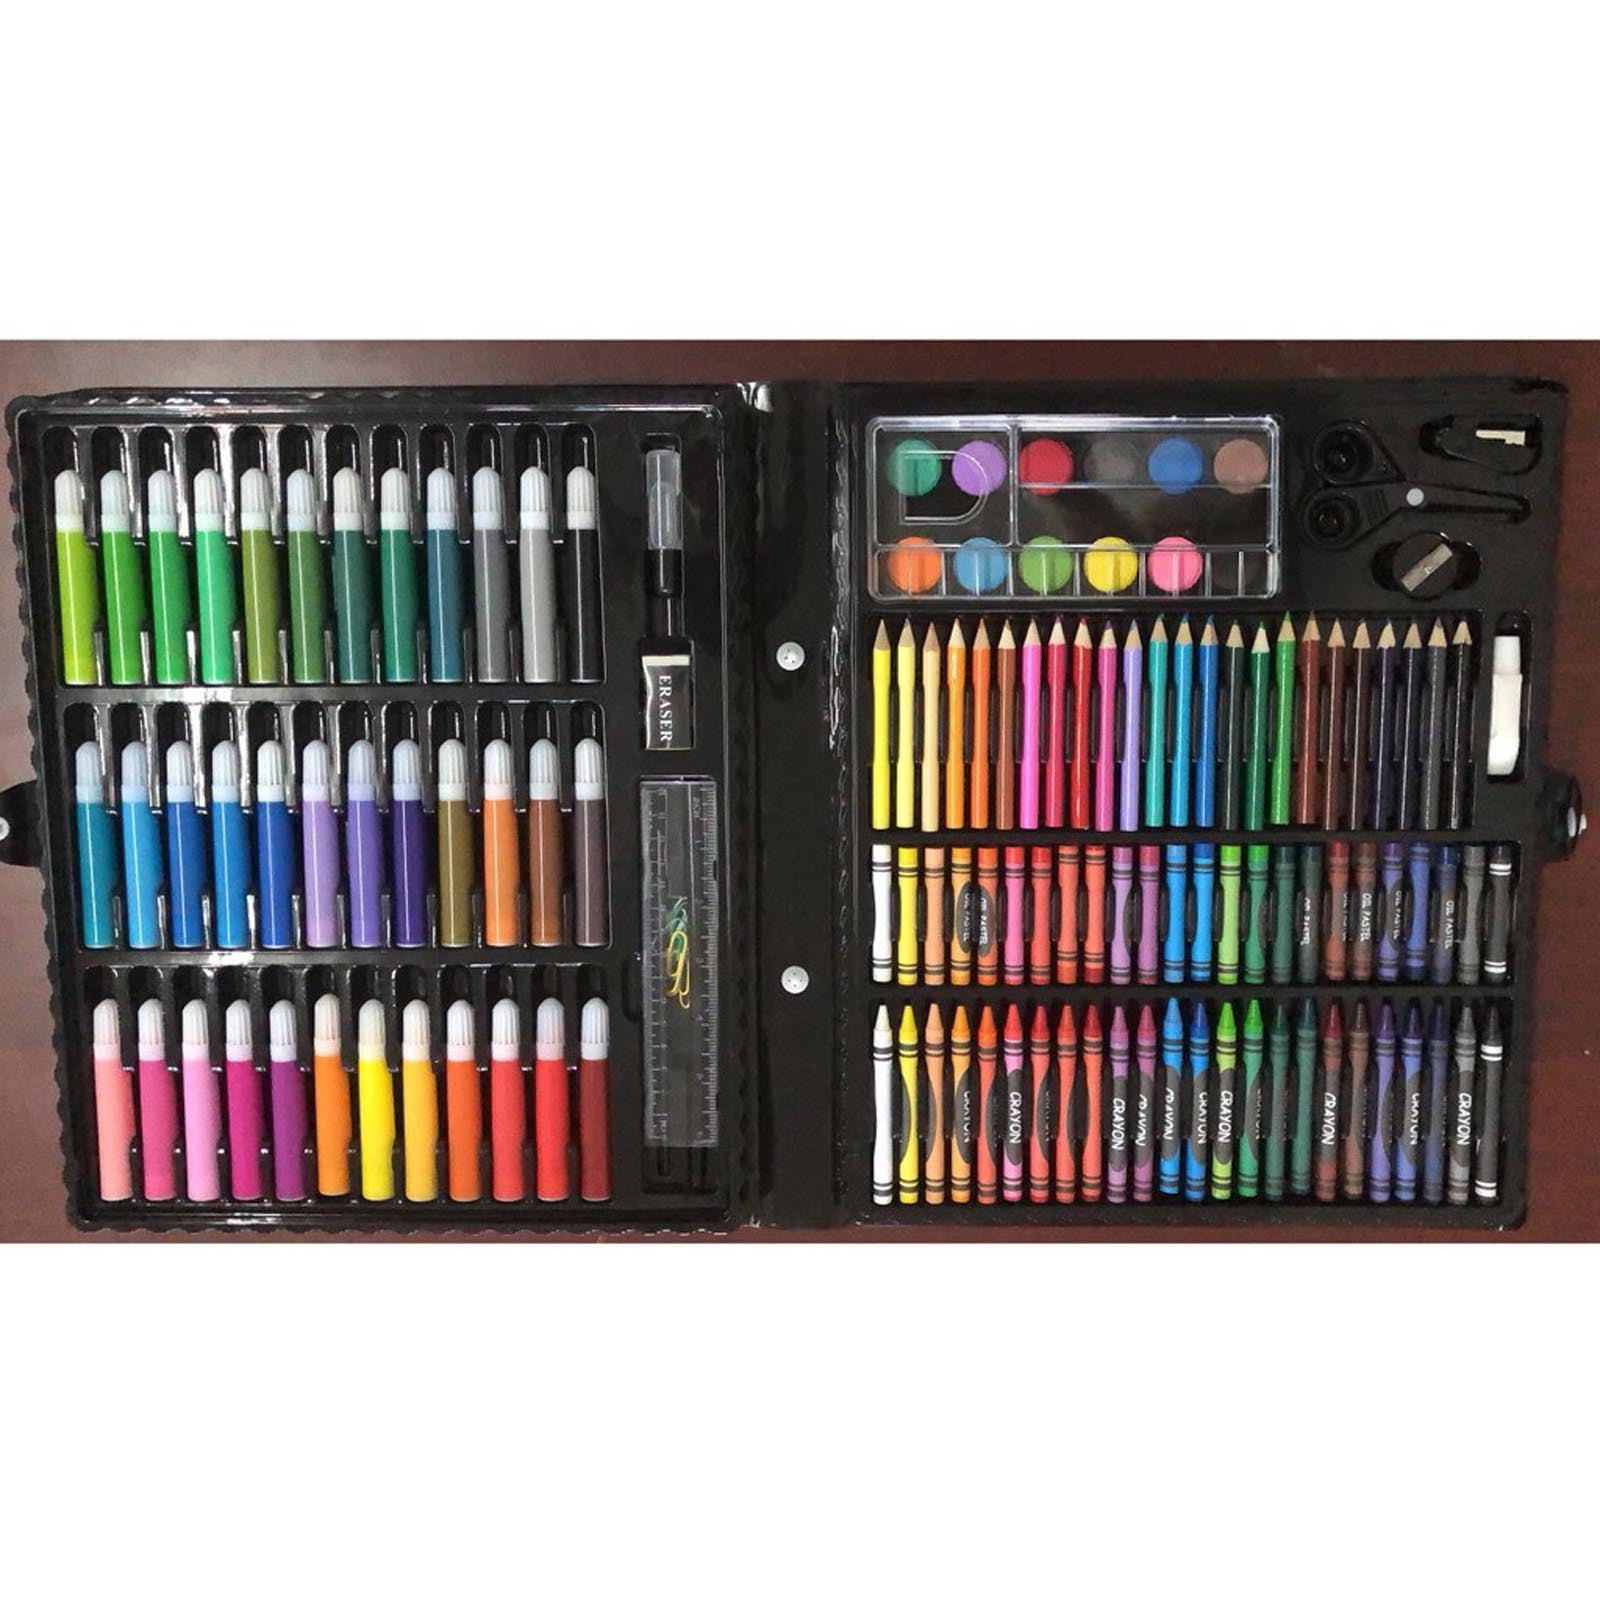  Arteza Kids Fantasy Coloring Kit, 3 Canvas Panels, 4 x 4 in, 10  Markers, 16 Watercolor Pencils, 1 Paint Brush, 1 Sharpener, Kids Activities  for Ages 6 and Up : Everything Else